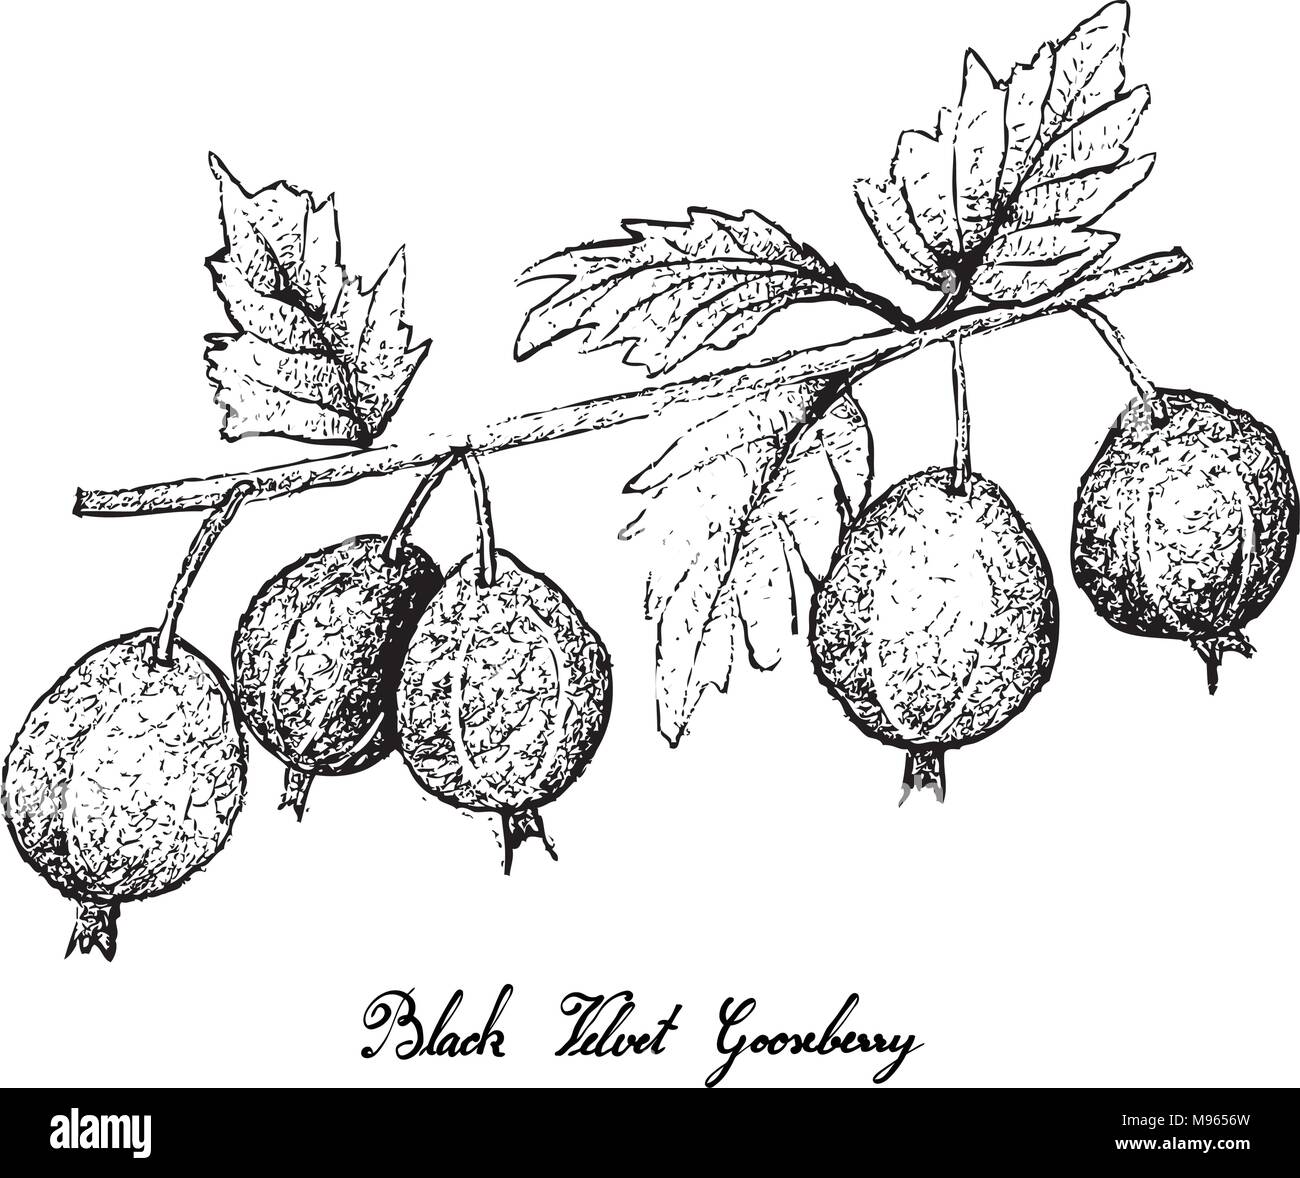 Berry Fruits, Illustration of Hand Drawn Sketch Fresh Black Velvet Gooseberry or Ribes Oxyacanthoides Fruit Isolated on White Background. Stock Vector